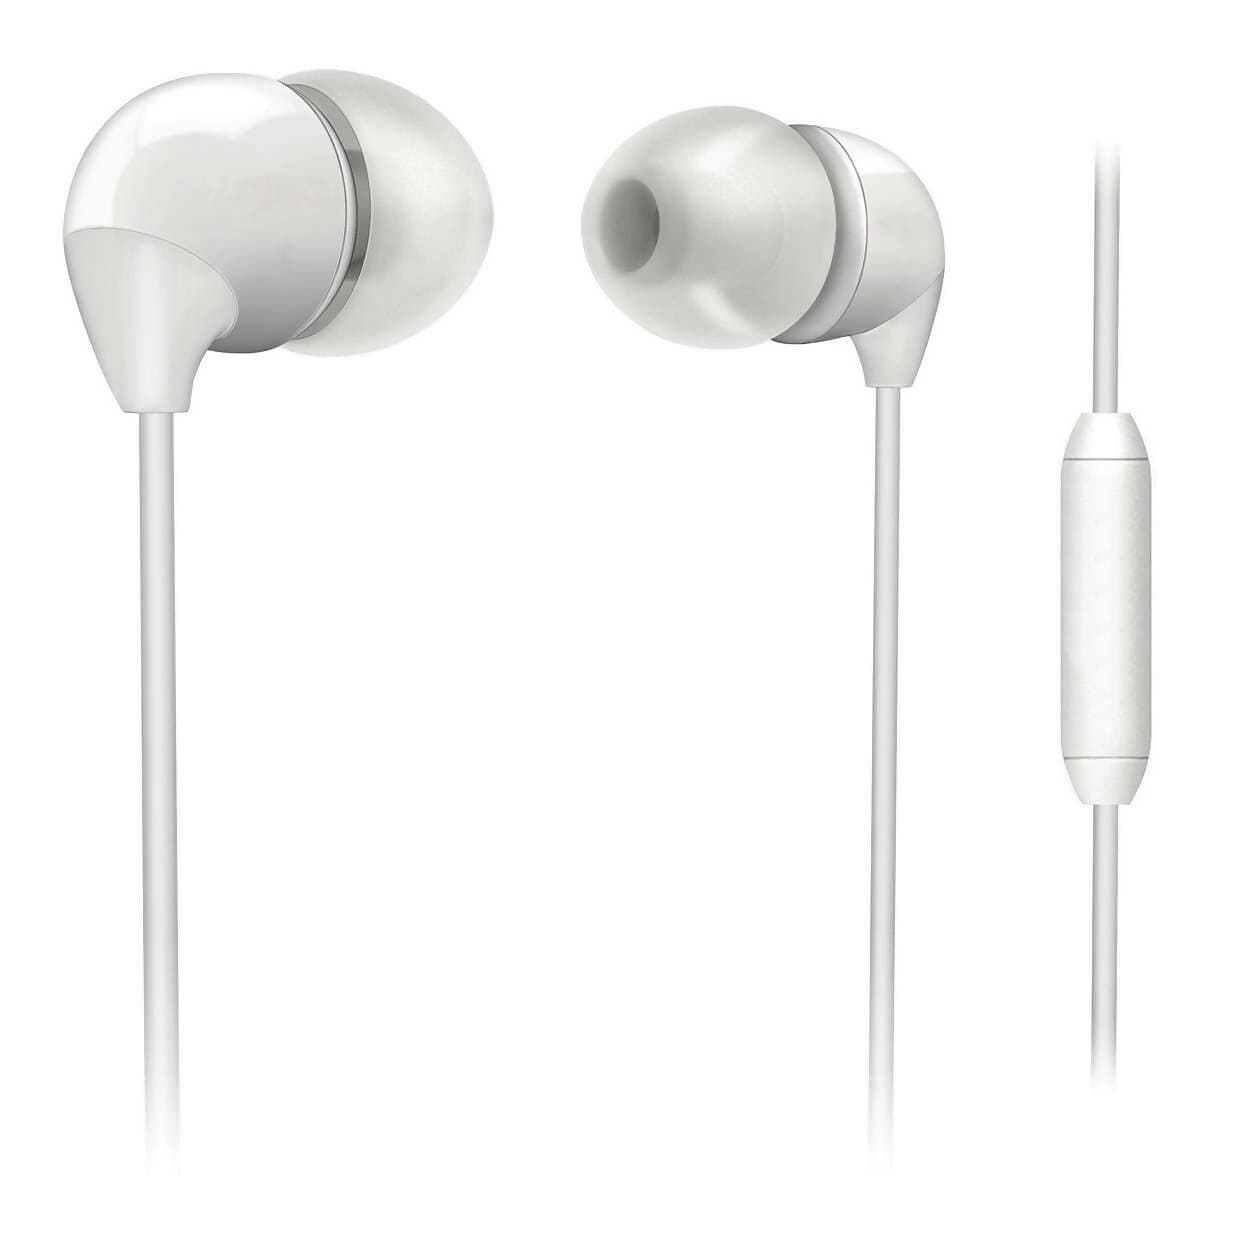 PROVIDEOLB Electronic Accessories Aita Wired Earphones White